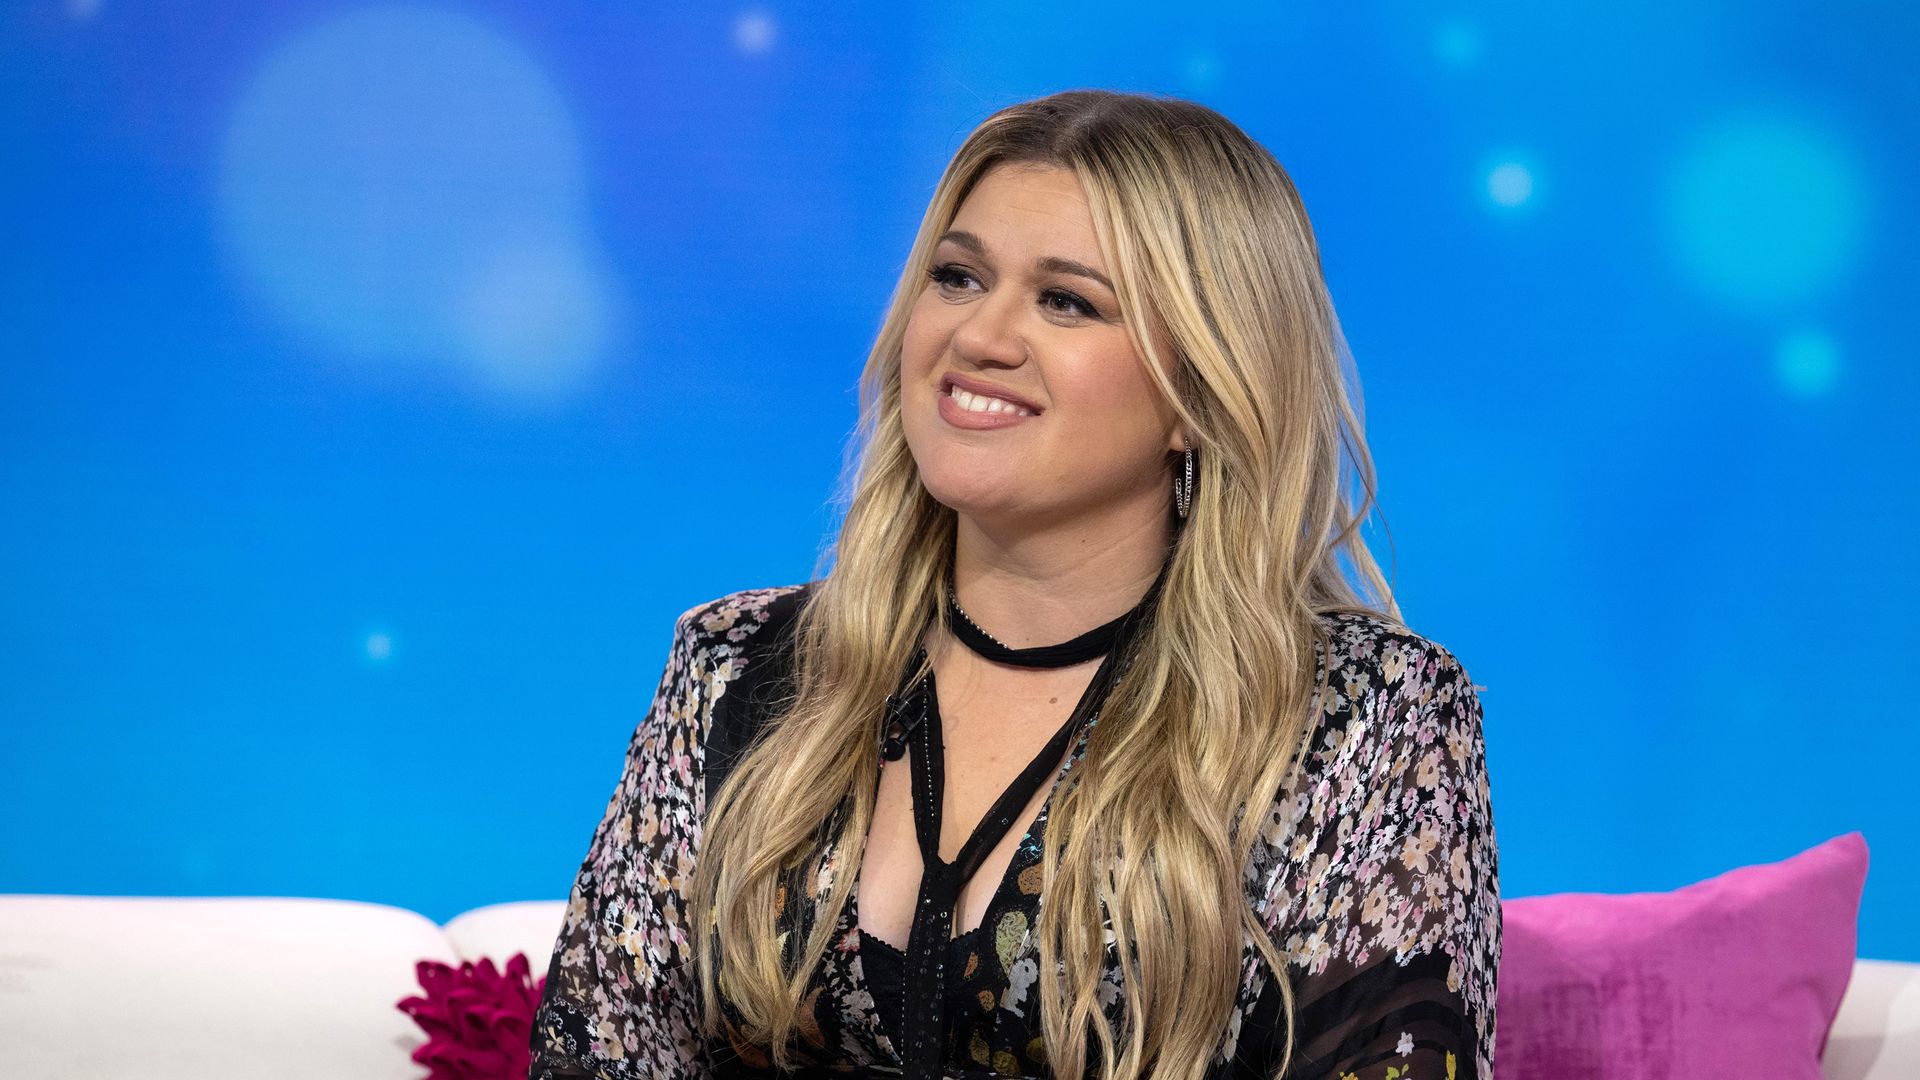 Kelly Clarkson has starstudded moment during emotional Las Vegas